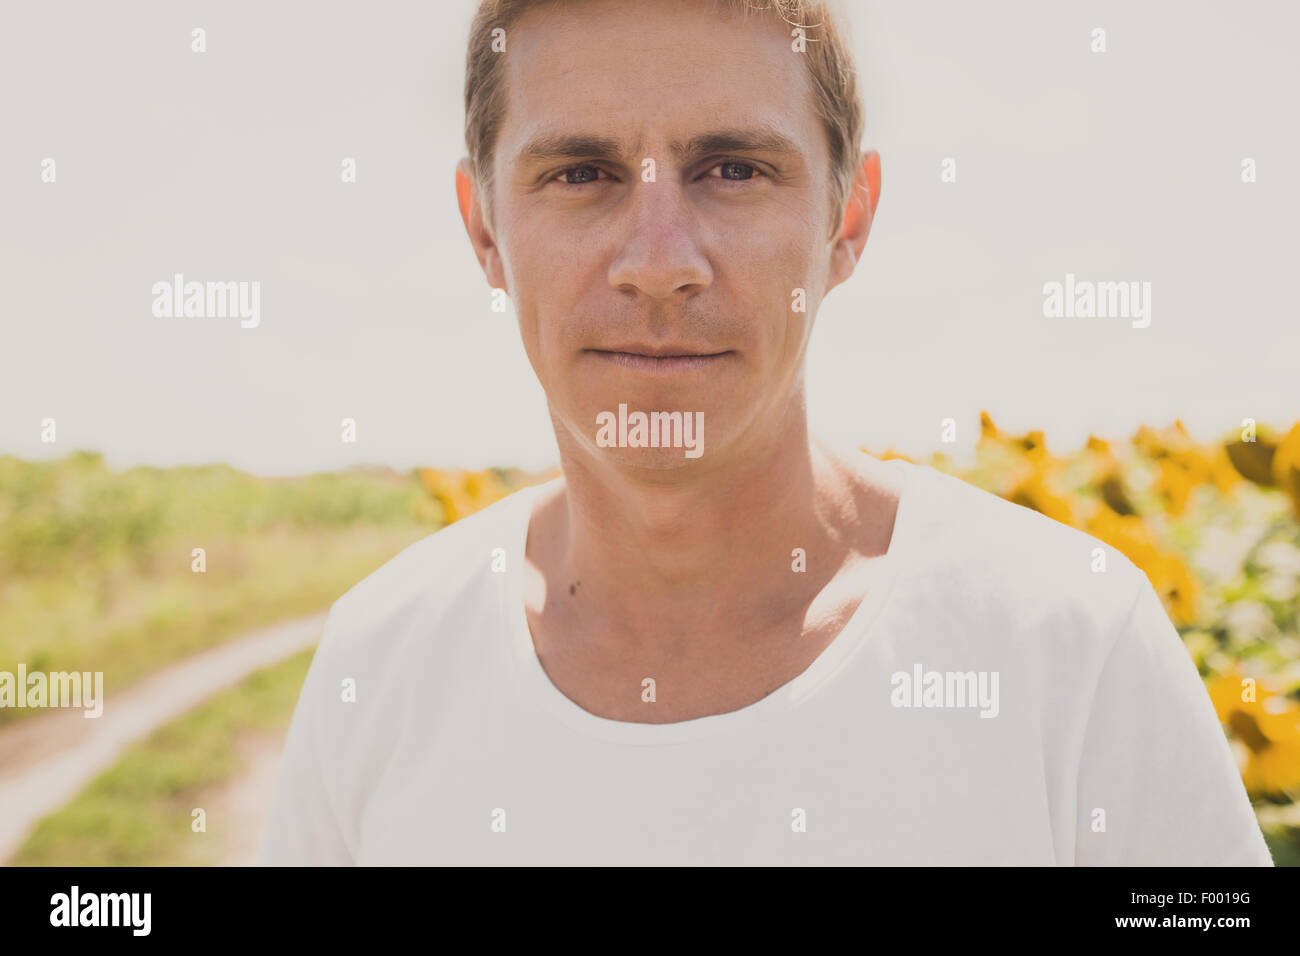 Portrait of casual man in white shirt, summertime outdoor Stock Photo